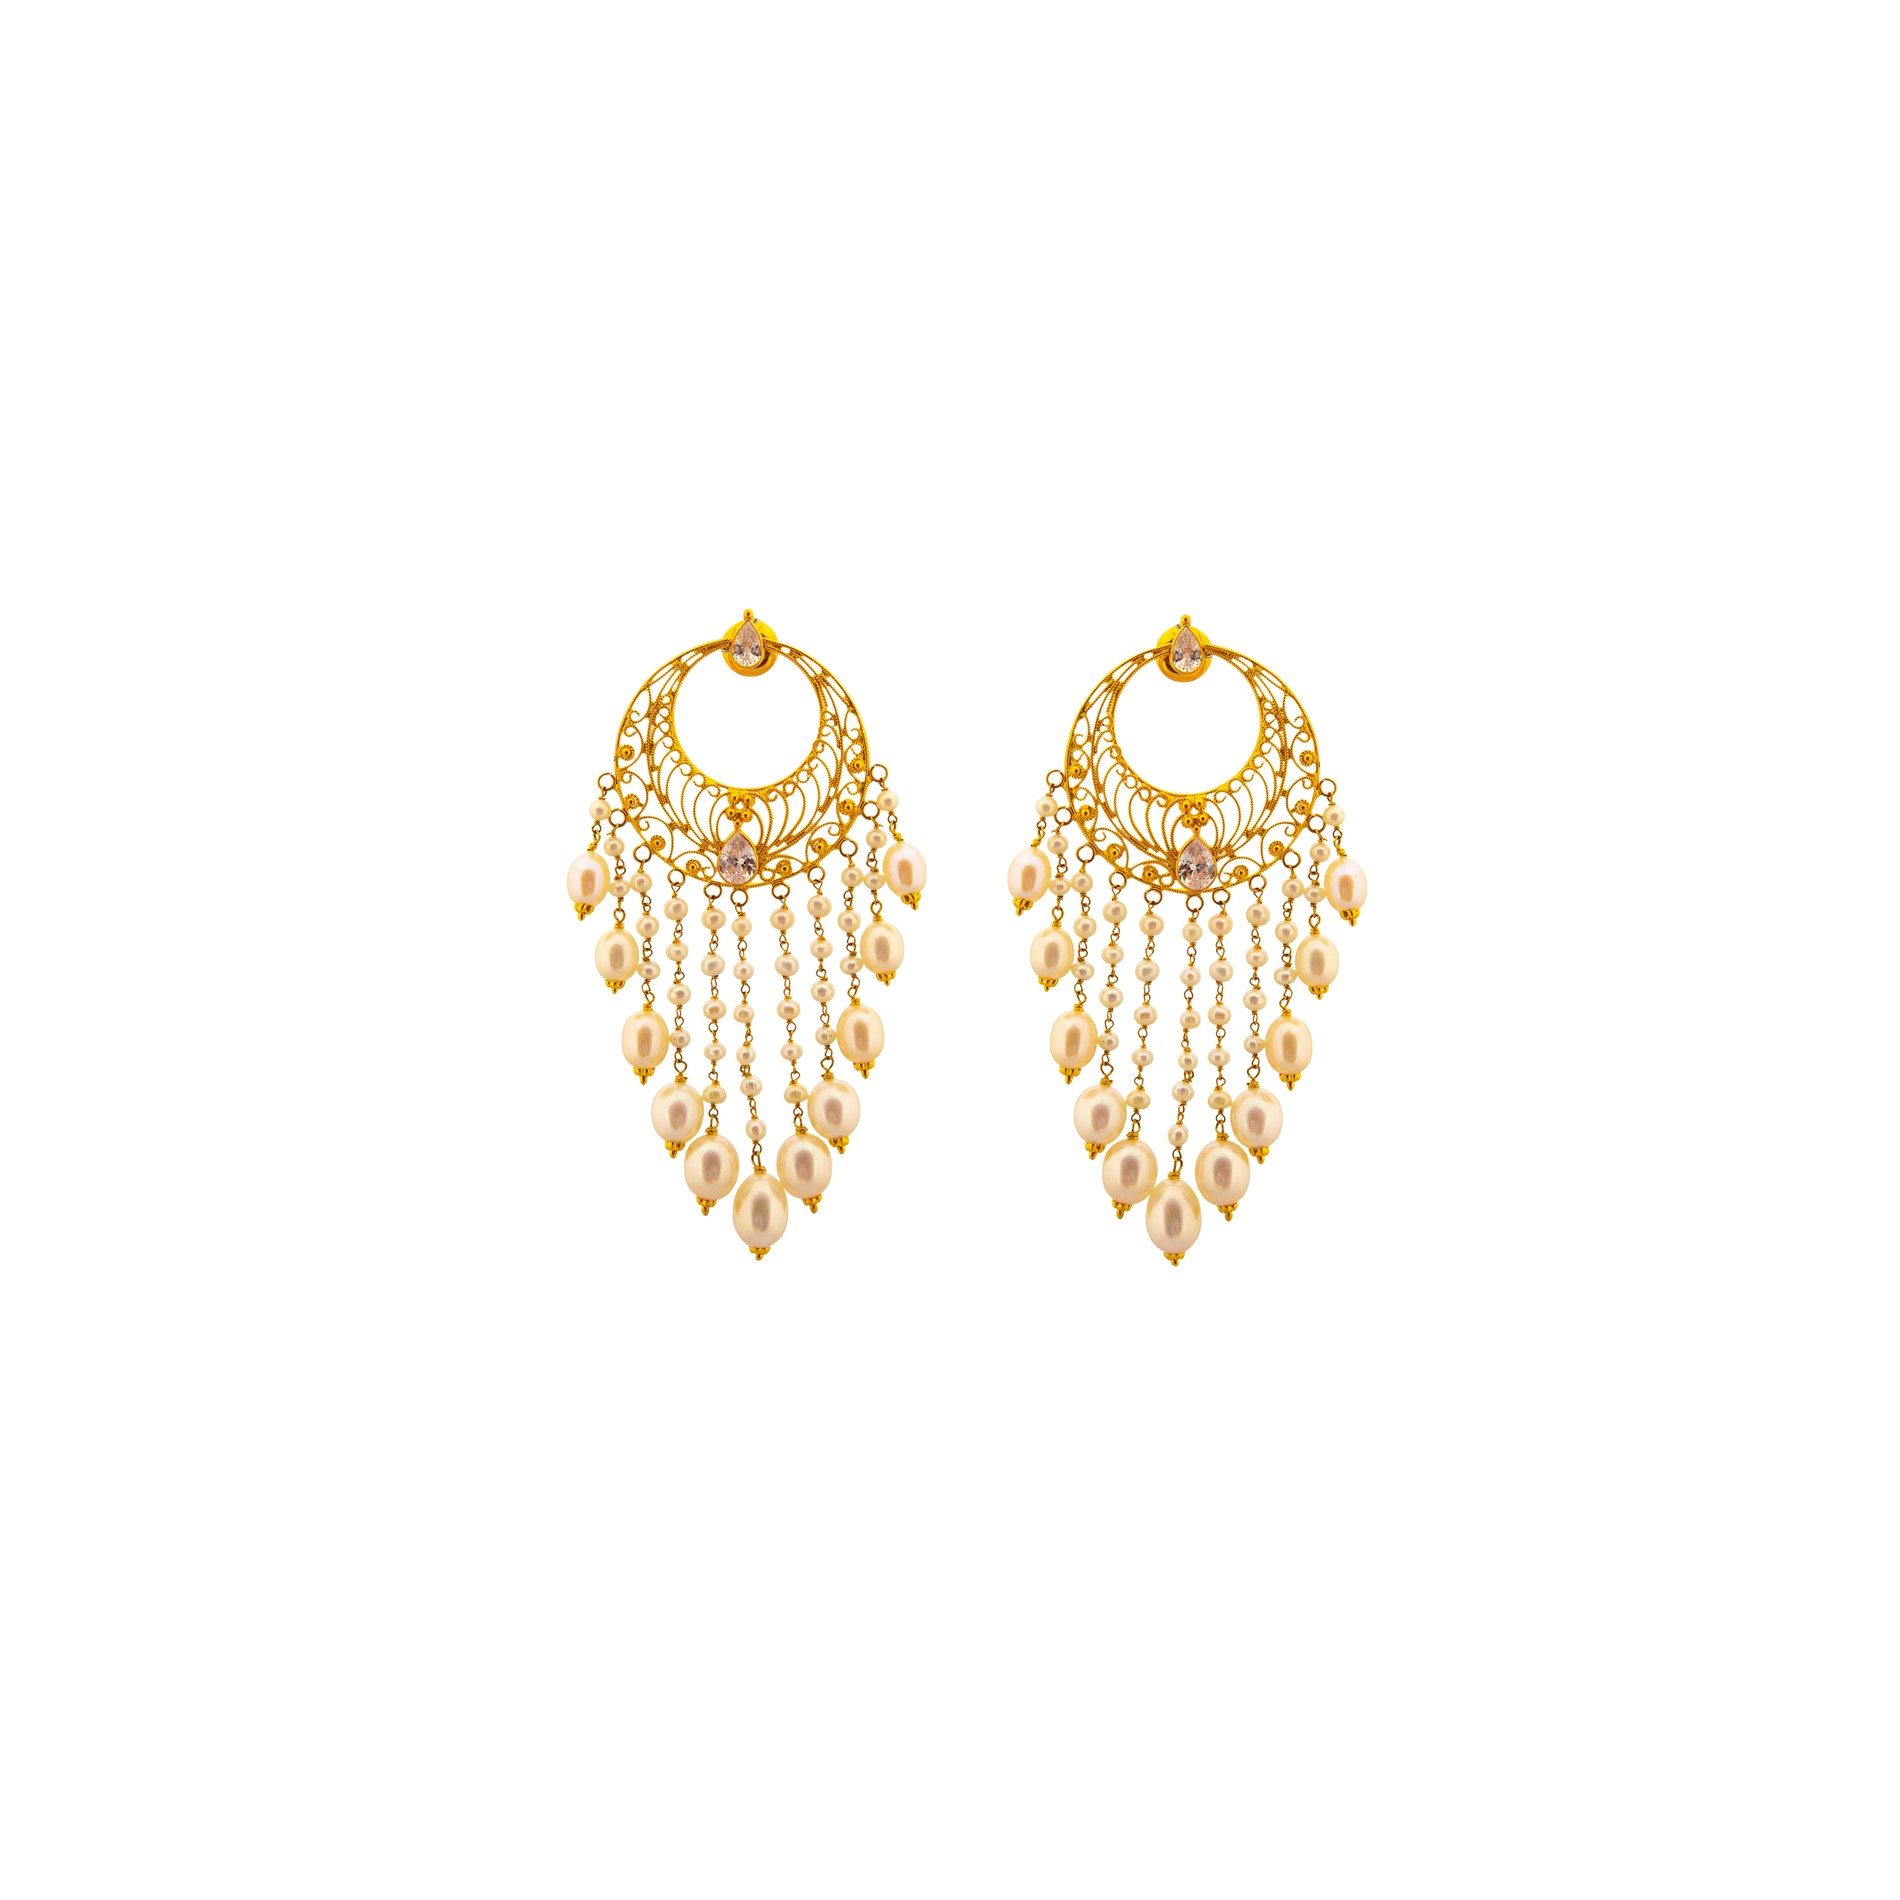 Buy Gold Earrings Chand bali with Cz stone at Krishna Pearls